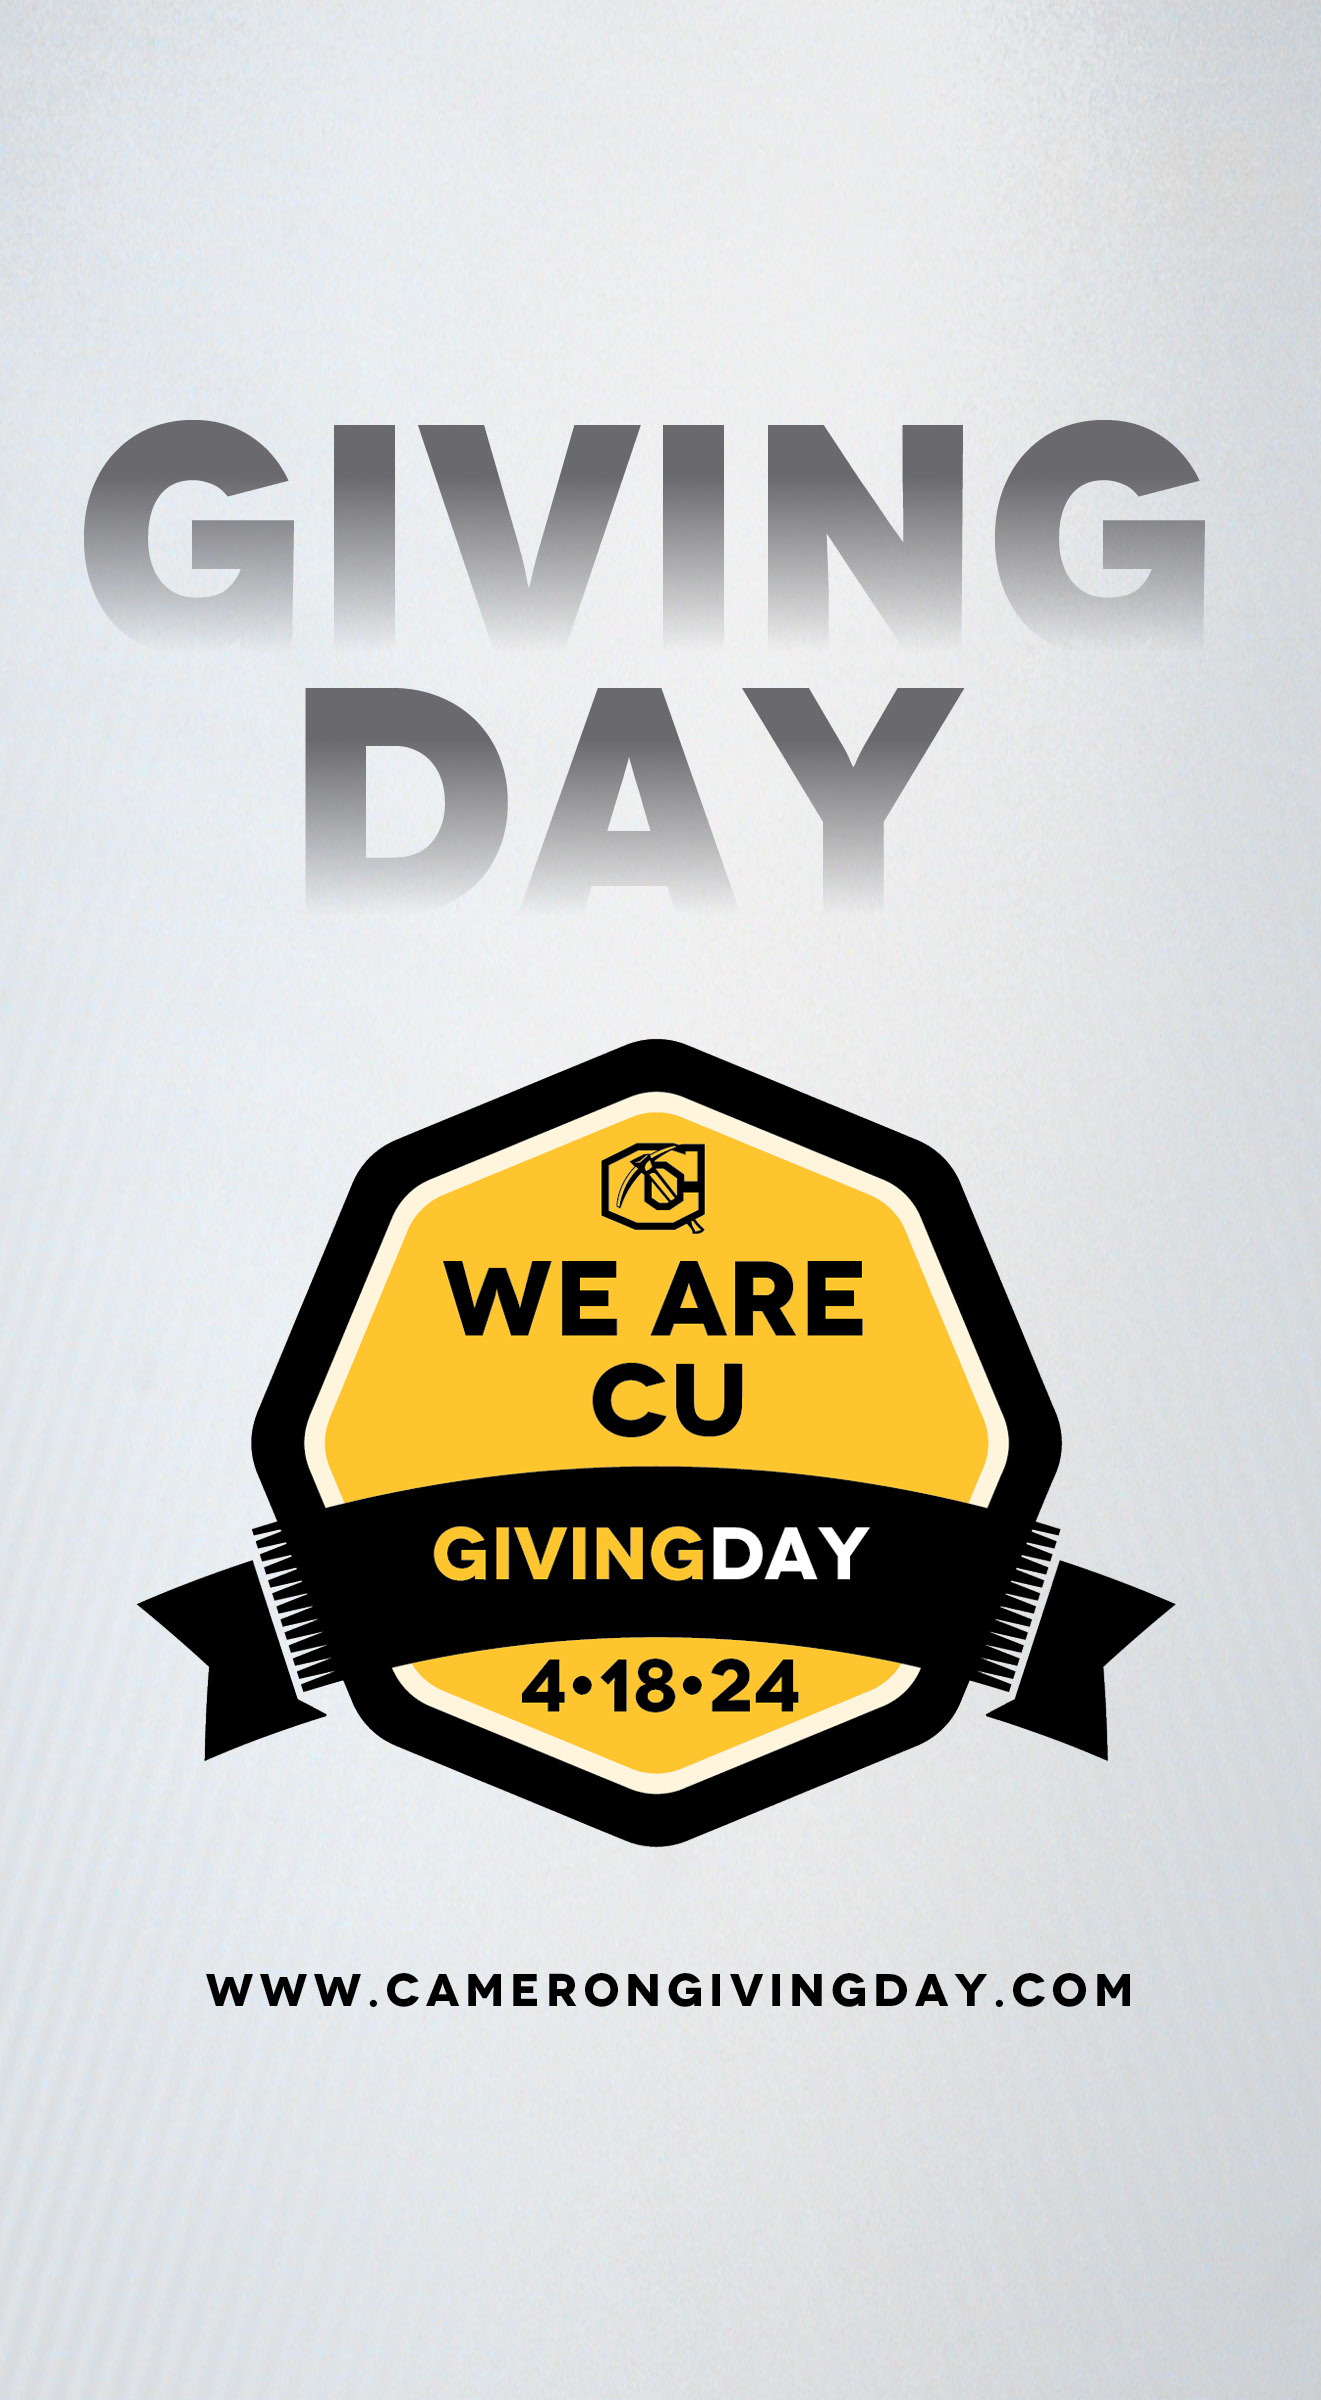 Giving Day
We Are C.U. Giving Day 4.18.24
www.camerongivingday.com